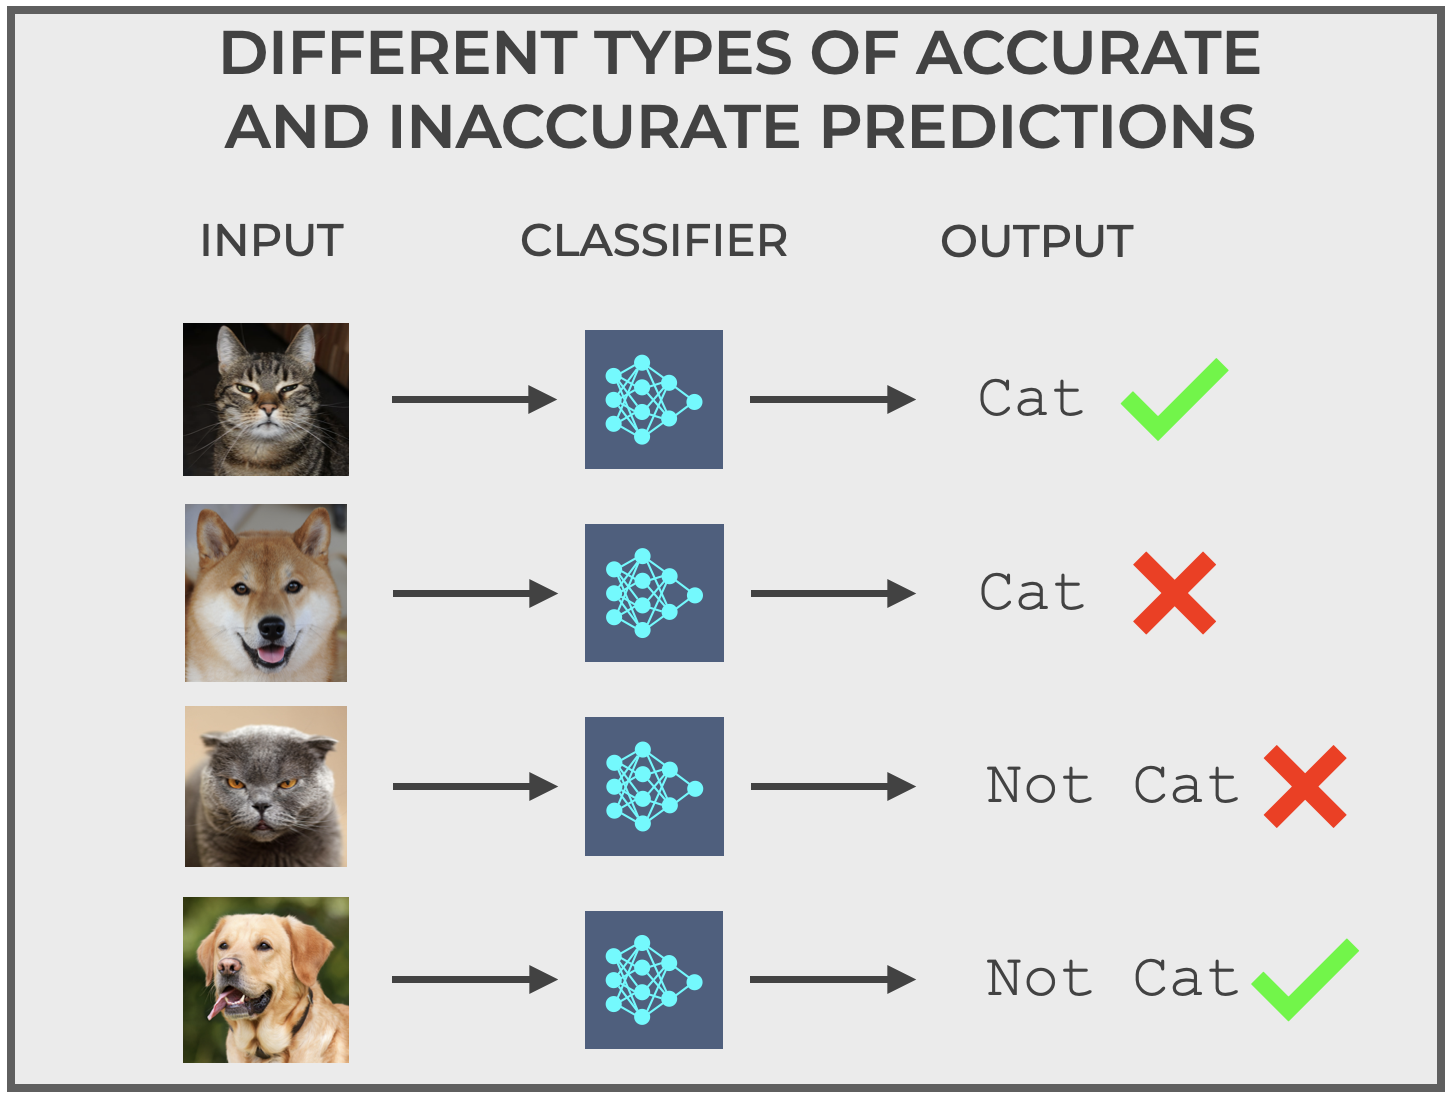 An image that shows 4 different types of correct and incorrect predictions for a binary classifier.